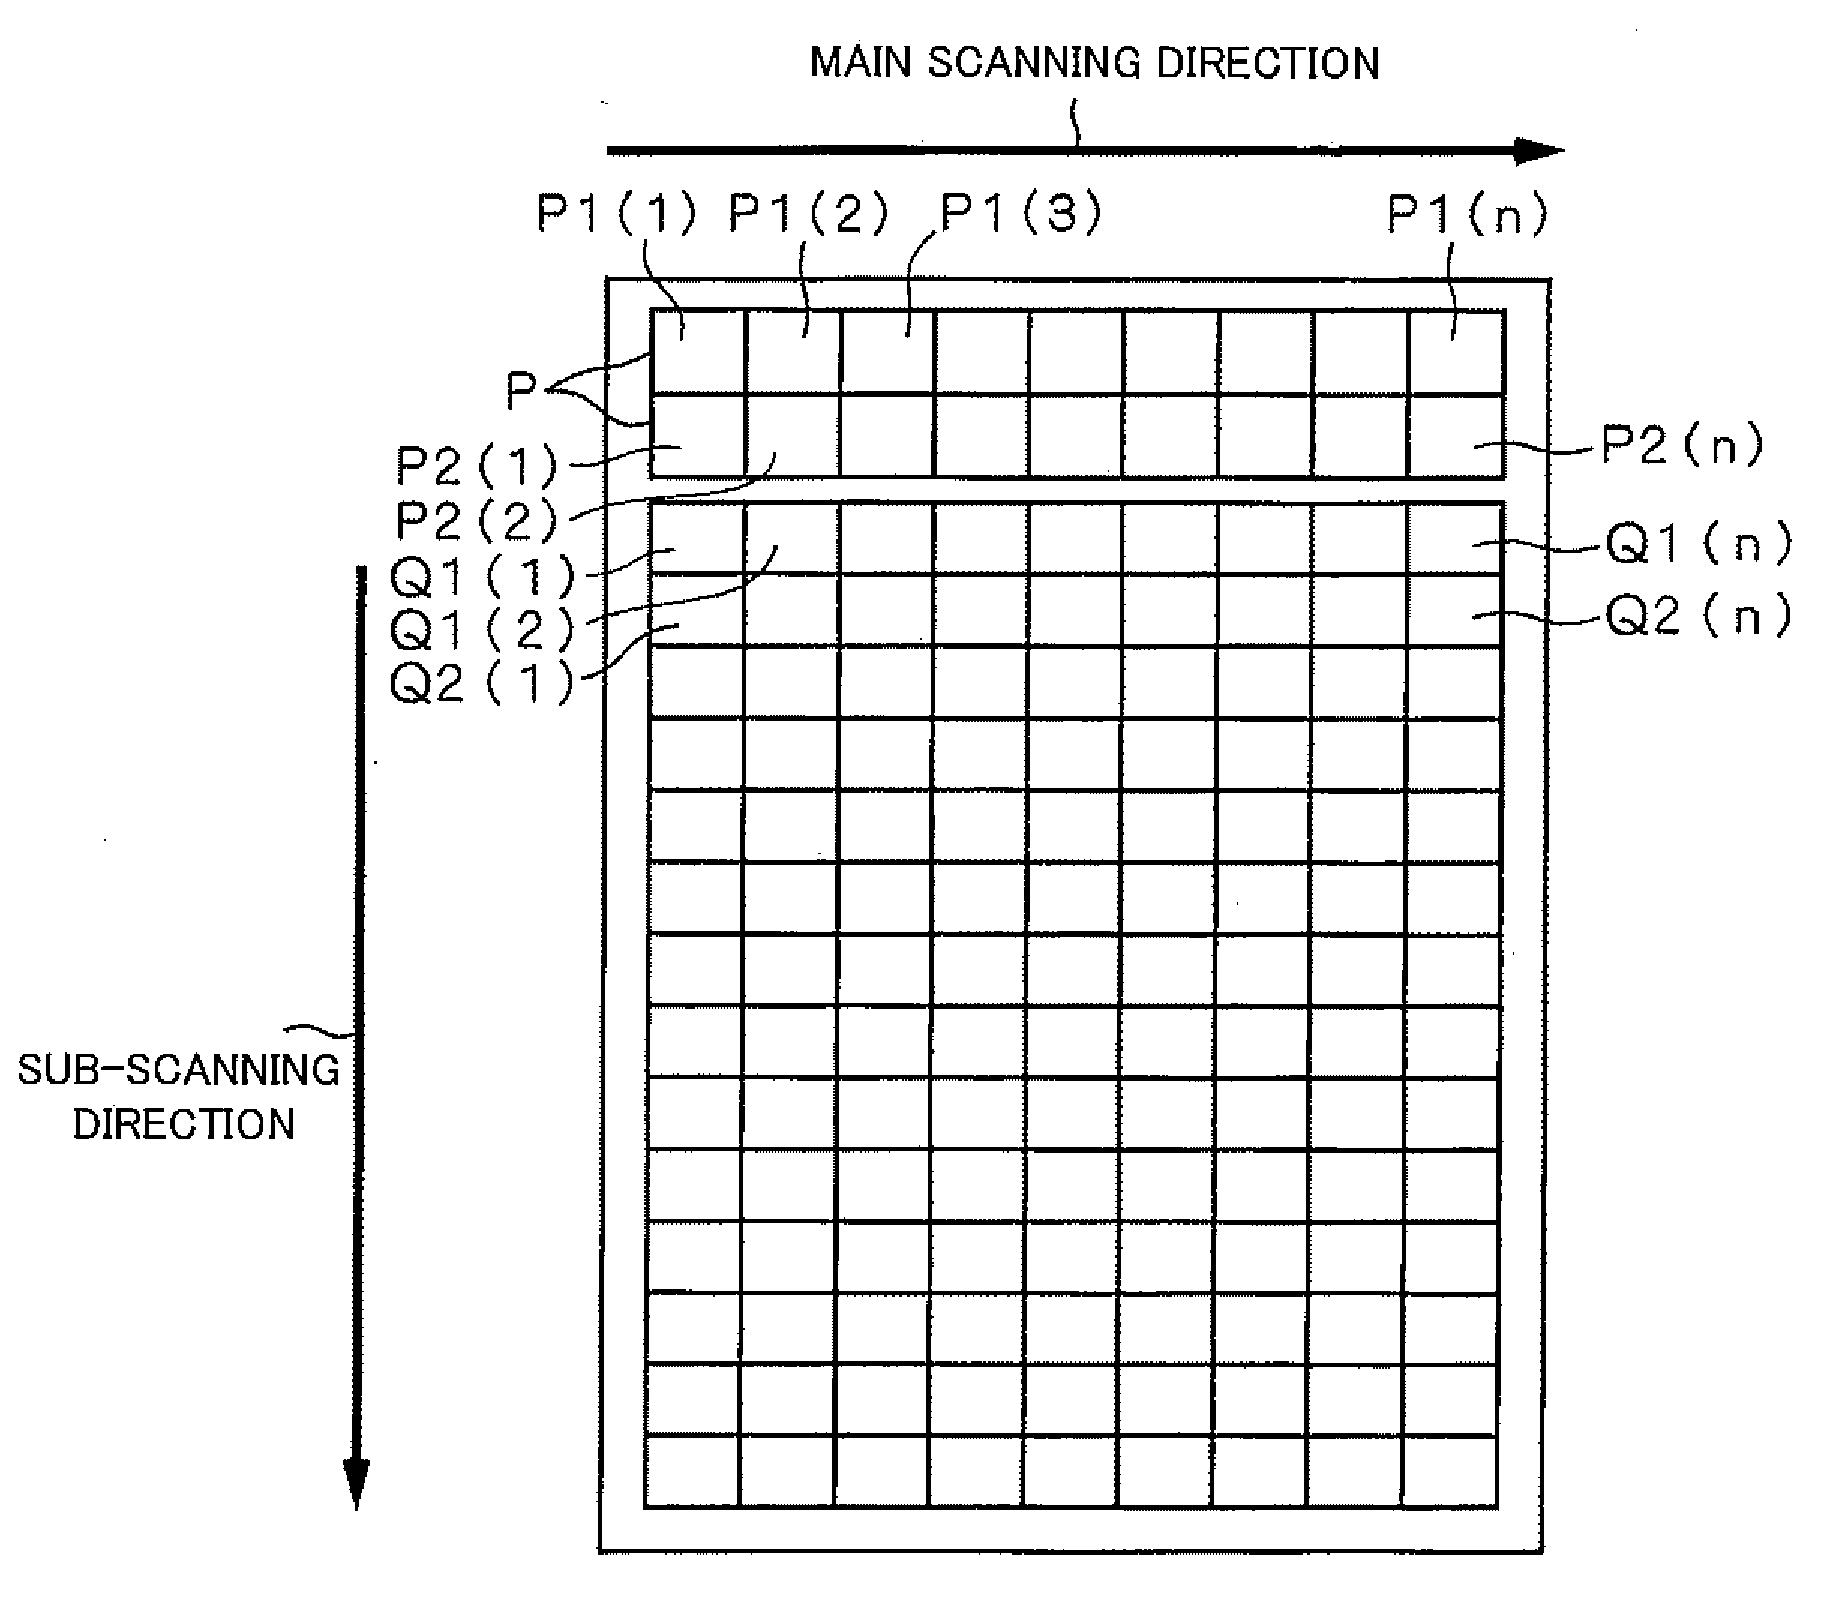 Image Processing Apparatus and Method for Detecting a Background Color